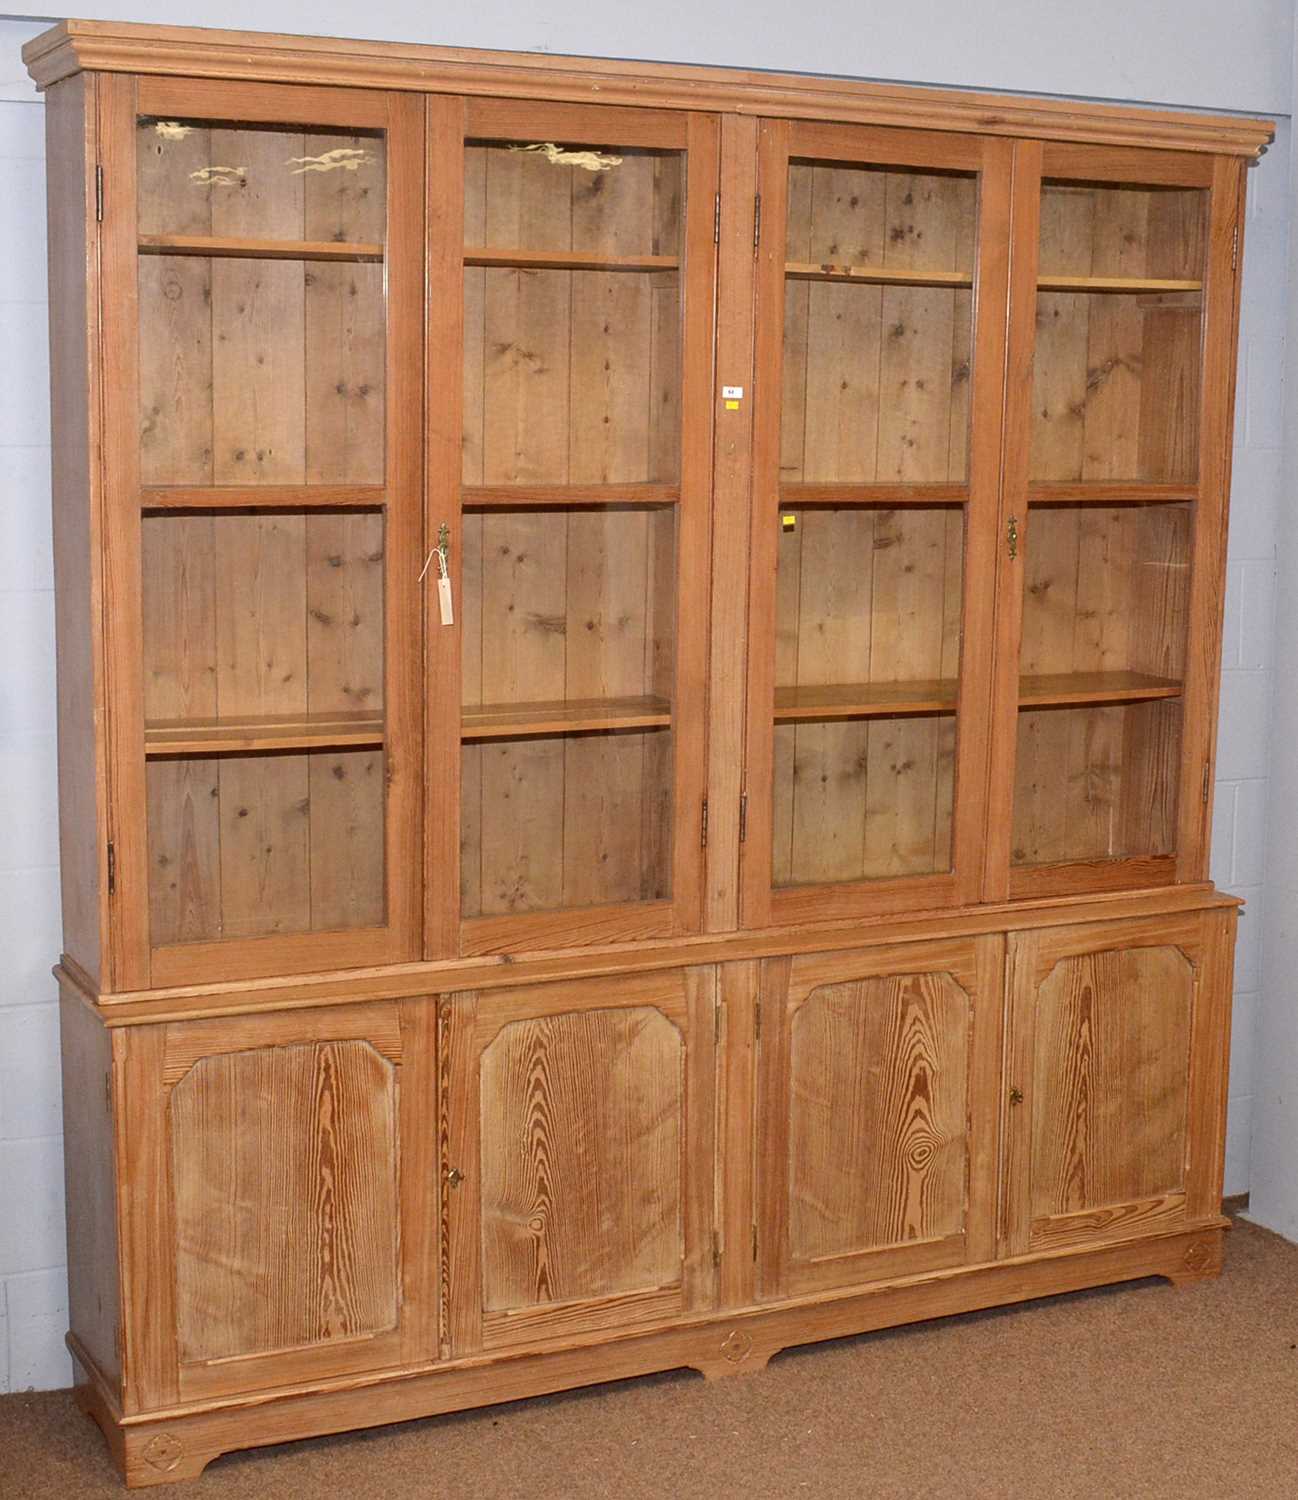 Lot 62 - A large pitch pine bookcase